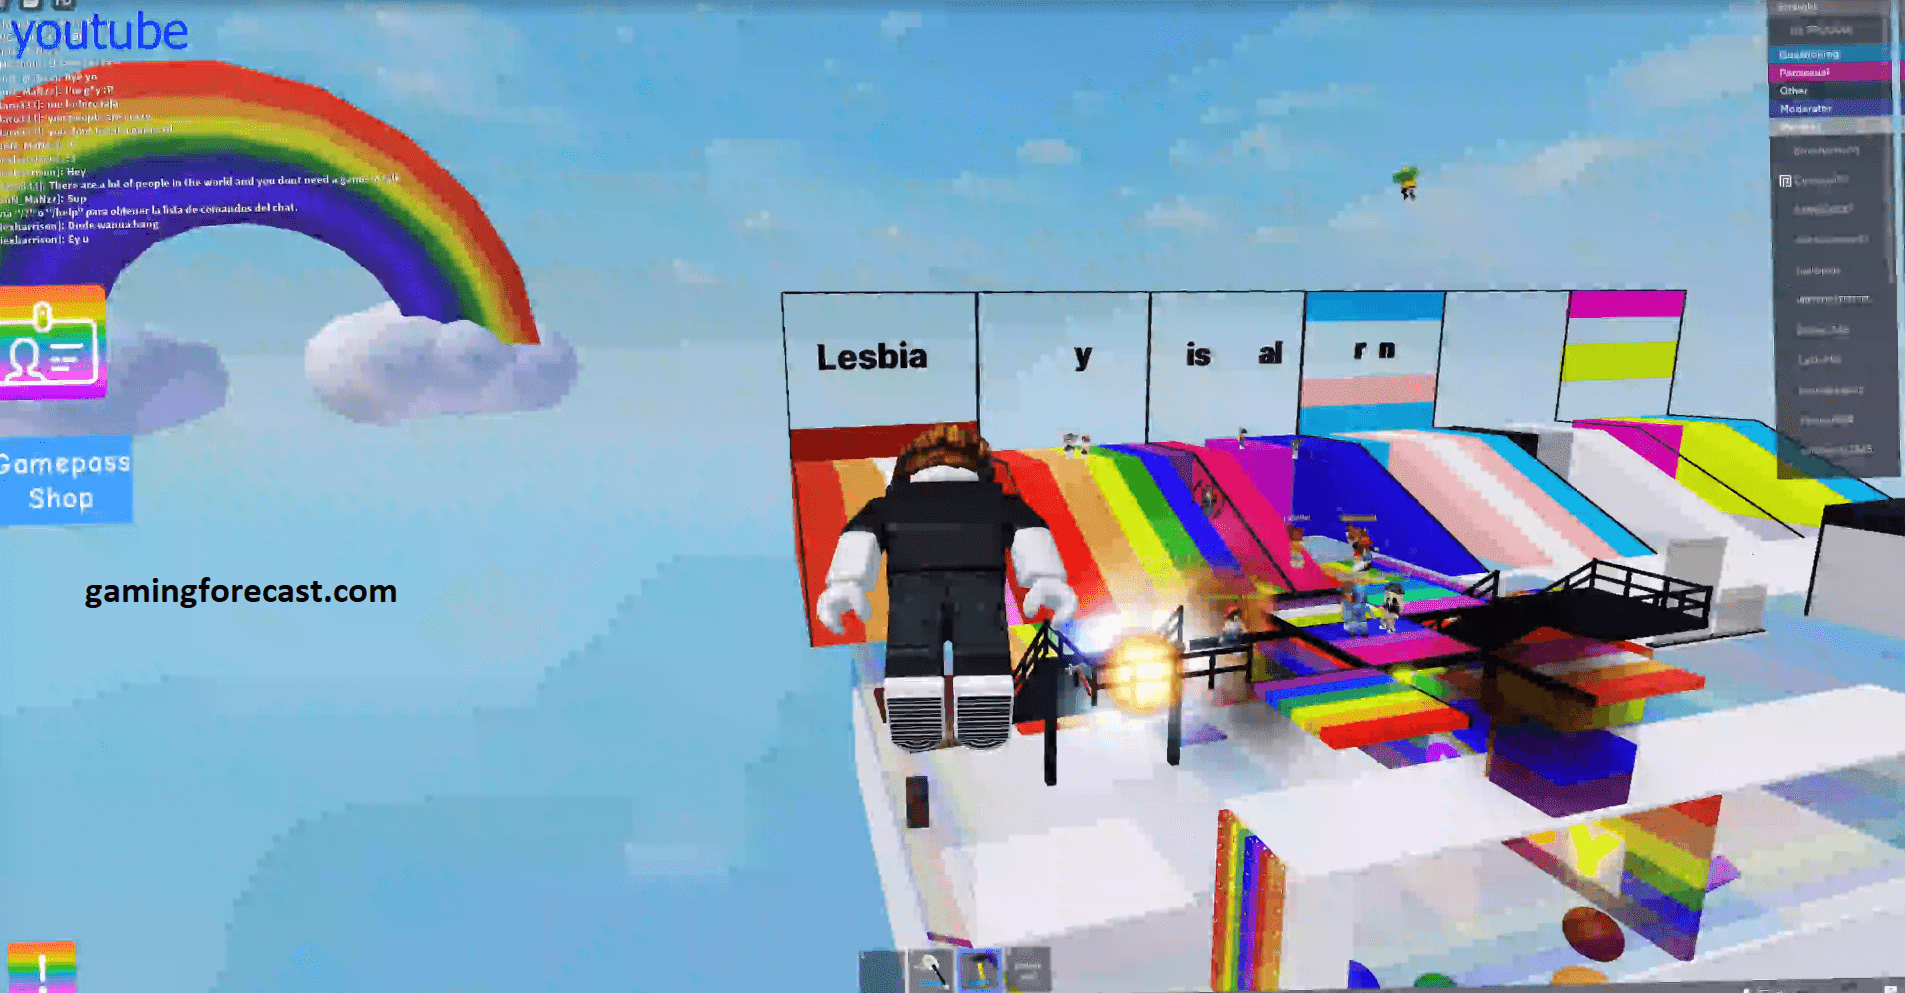 Roblox Hack Download Pc Destroy Lobby Fly Aimbot Scripts 2021 Gaming Forecast Download Free Online Game Hacks - roblox hack injects